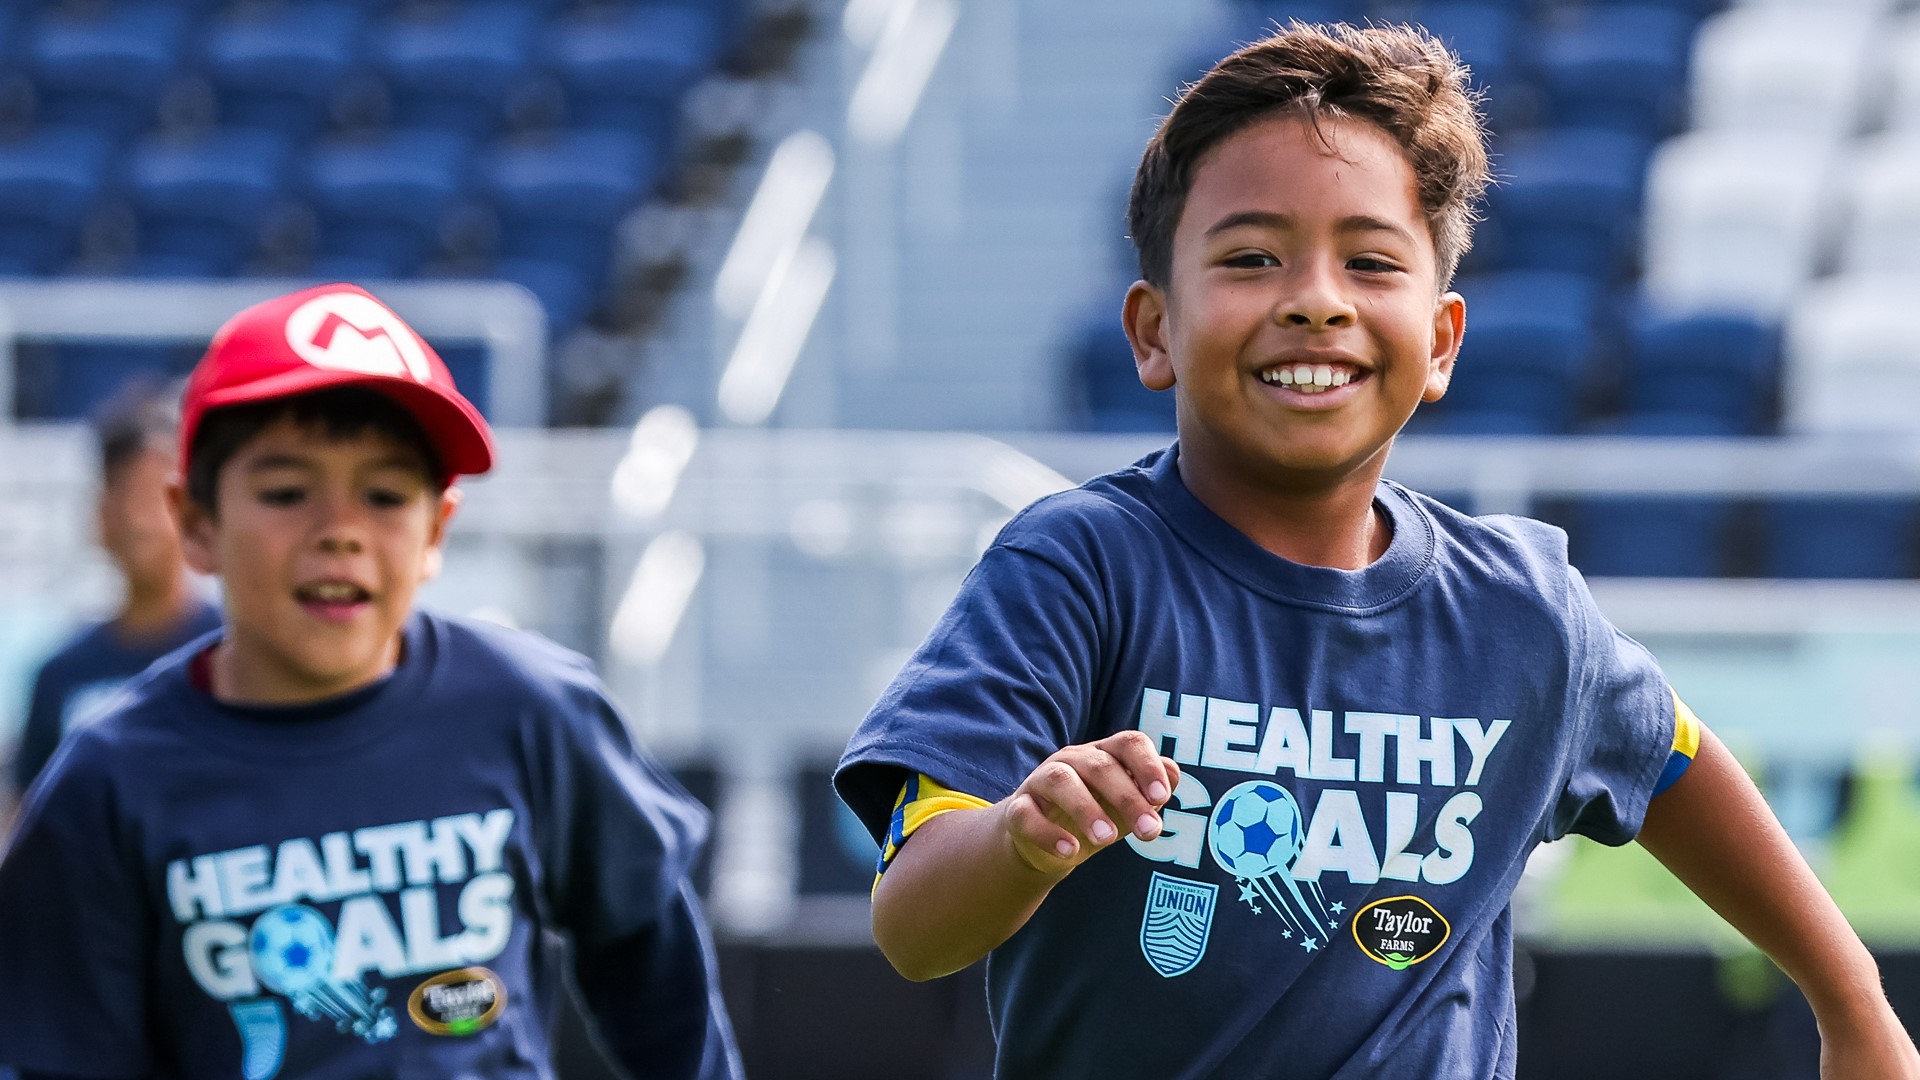 Monterey Bay Football Club and Taylor Farms Deliver on Healthy Goals  Campaign - Monterey Bay F.C.